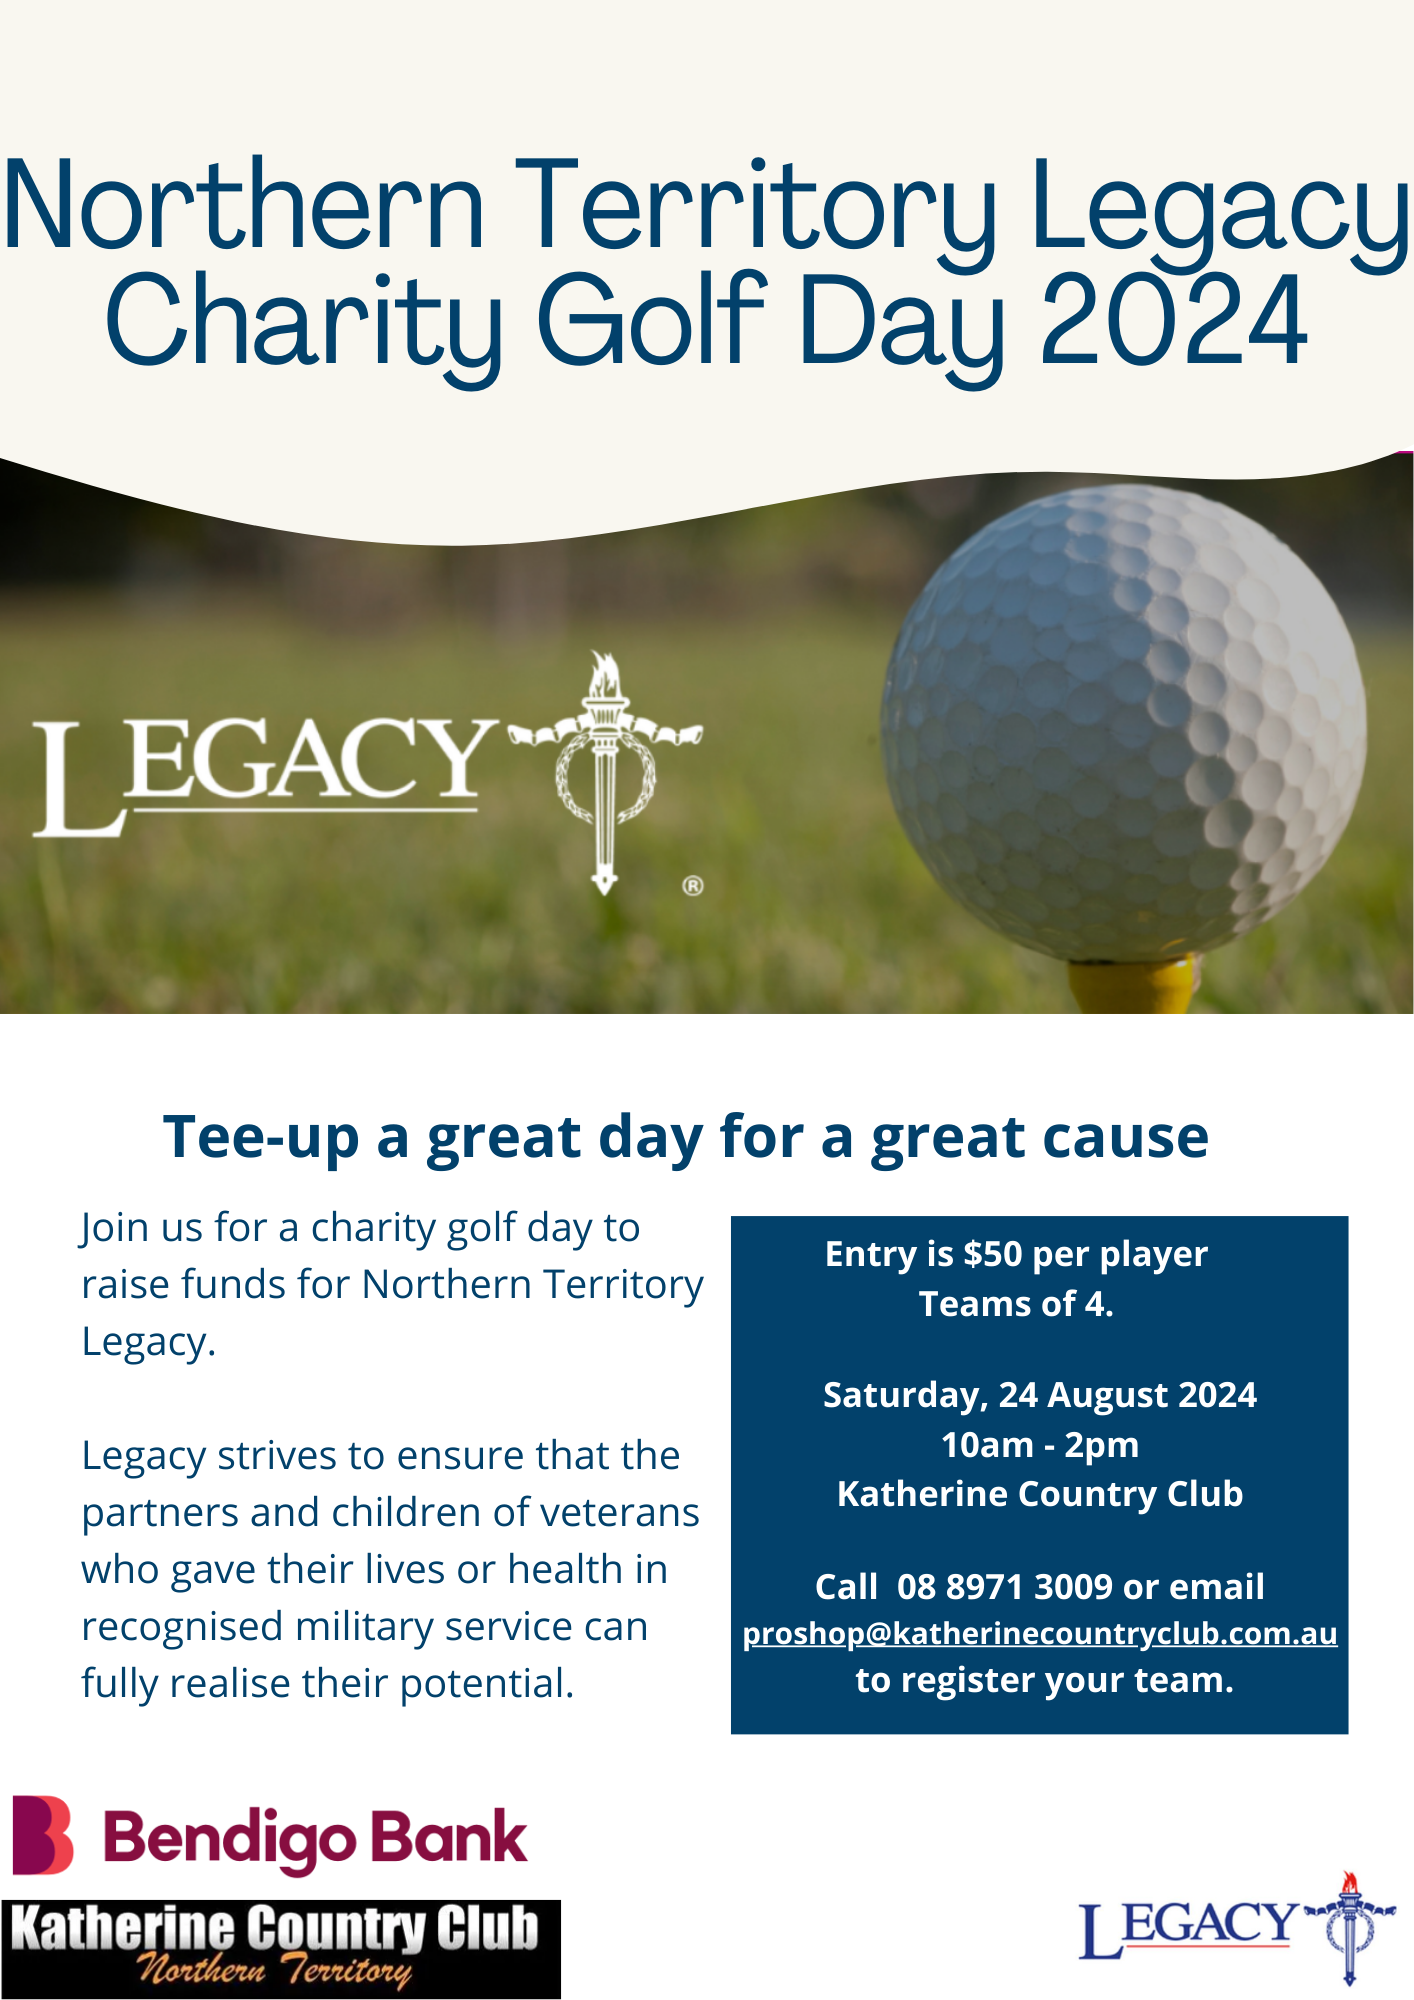 NT Legacy Charity Golf Day